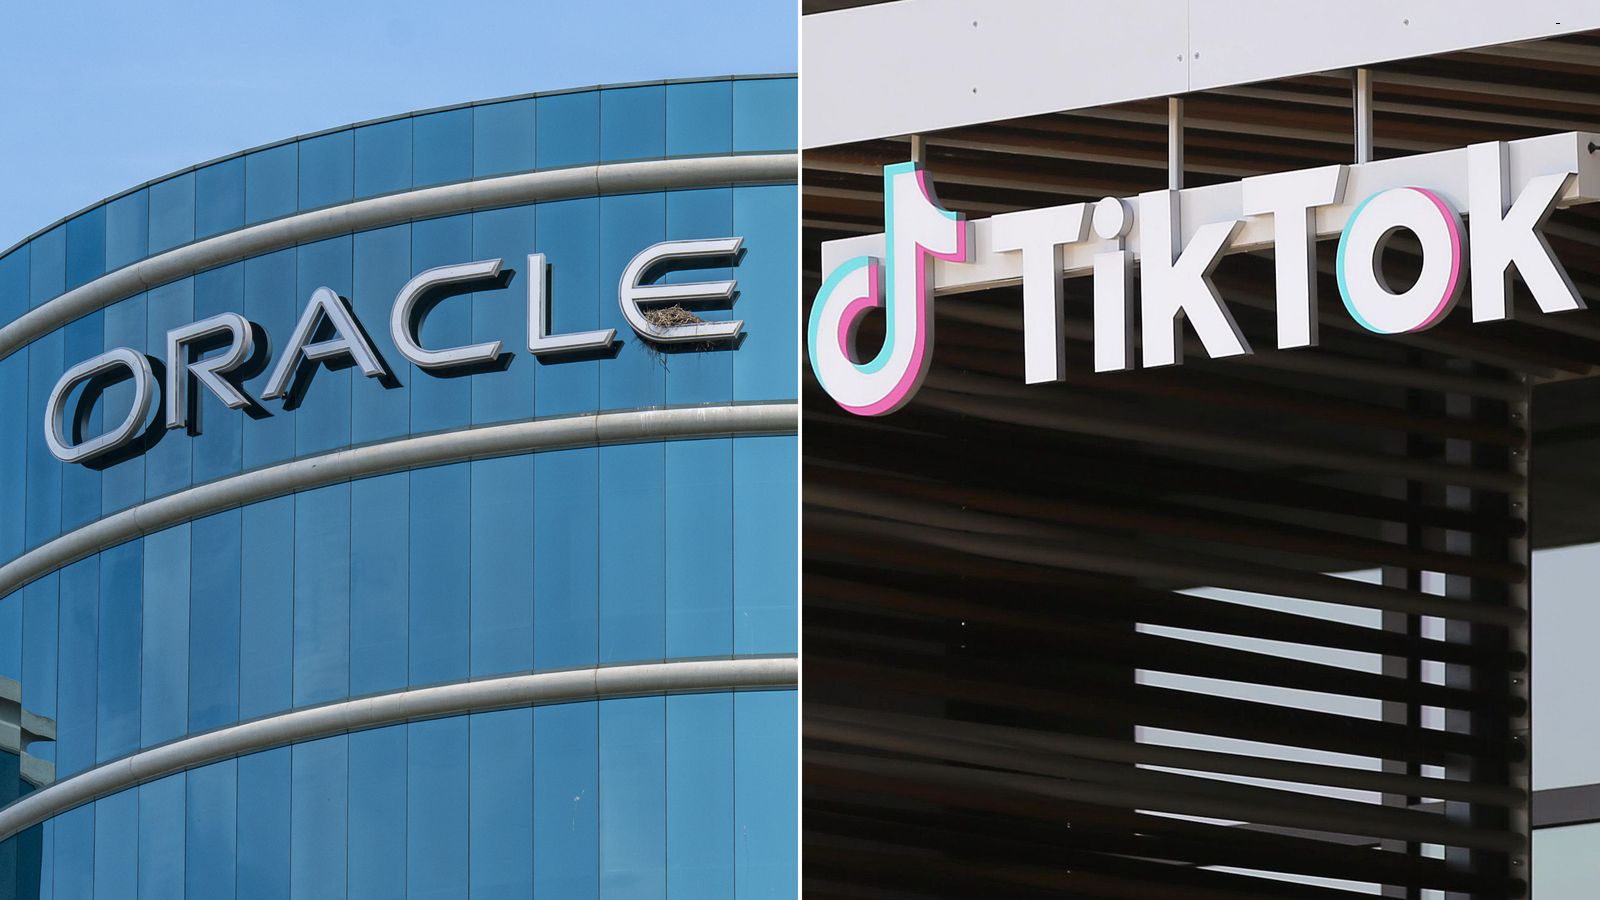 TikTok Says US User Data Now Stored by Default on Oracle Servers - CNET